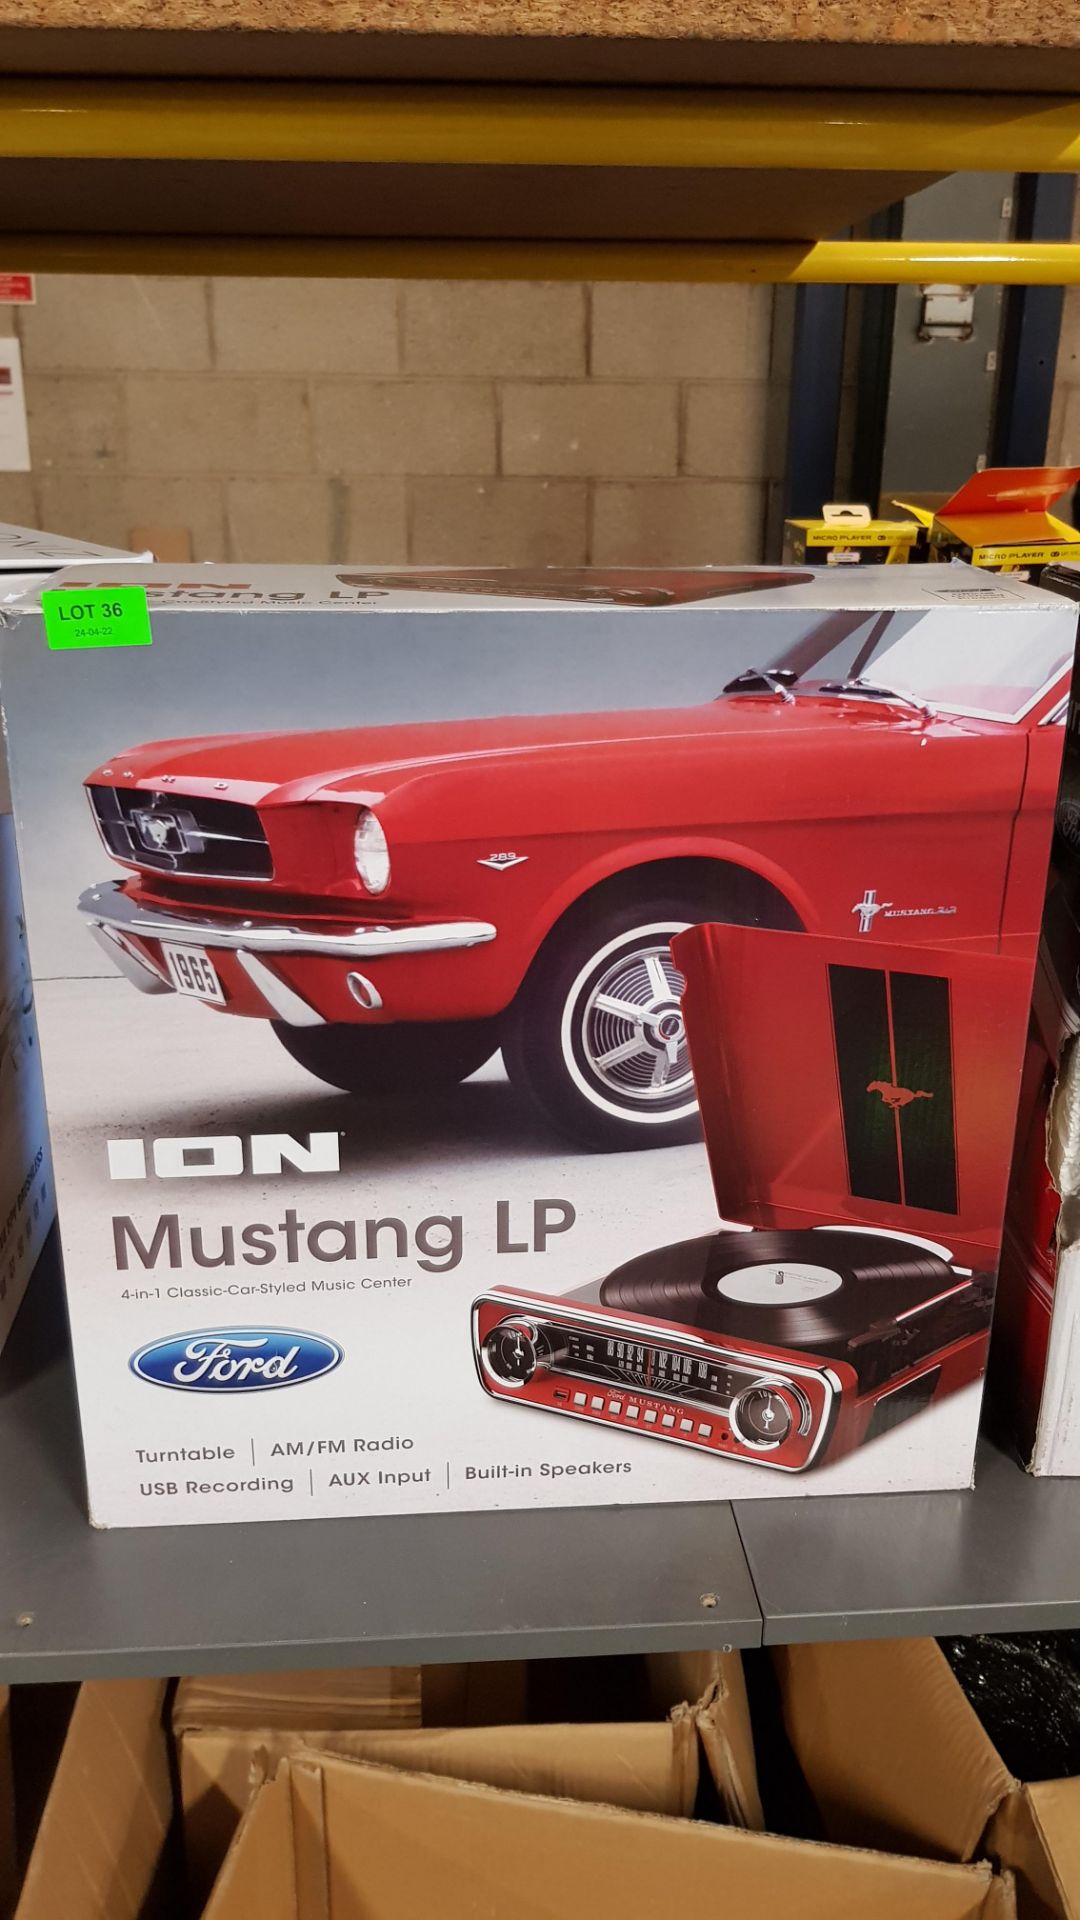 (8B) RRP £99.99. ION Ford Mustang LP. 4 in 1 Classic Car Styled Music Center. - Image 7 of 7